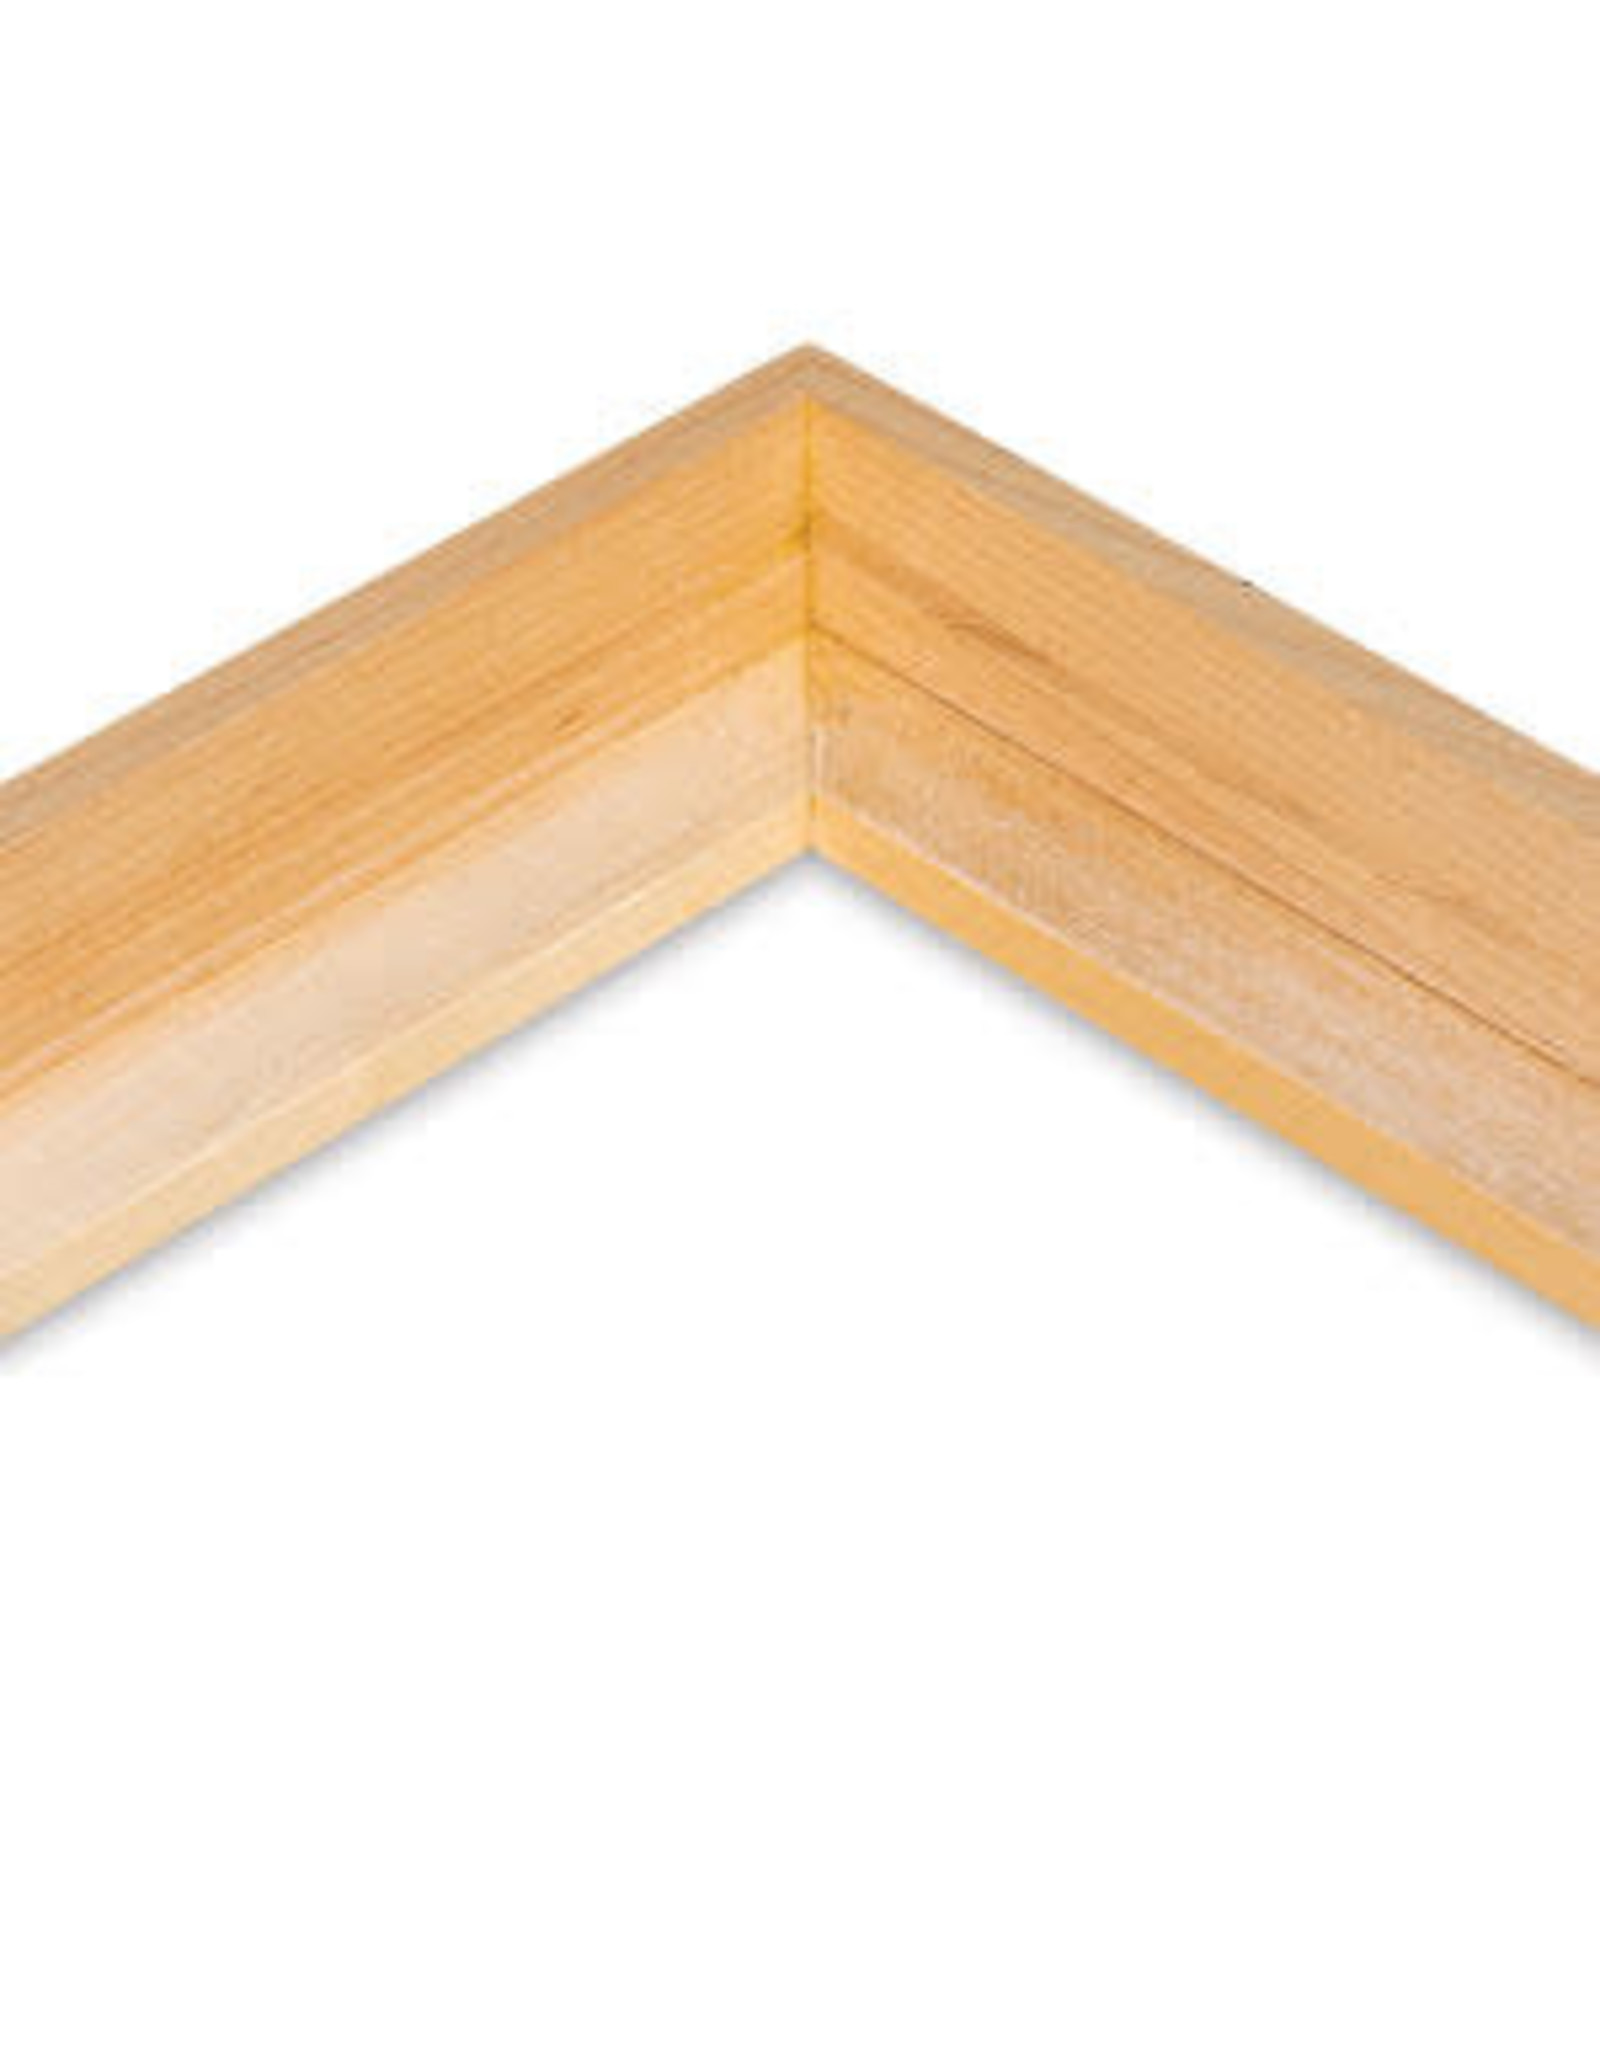 CLEARANCE Floaterframe 7/8" Thin Maple 12x12